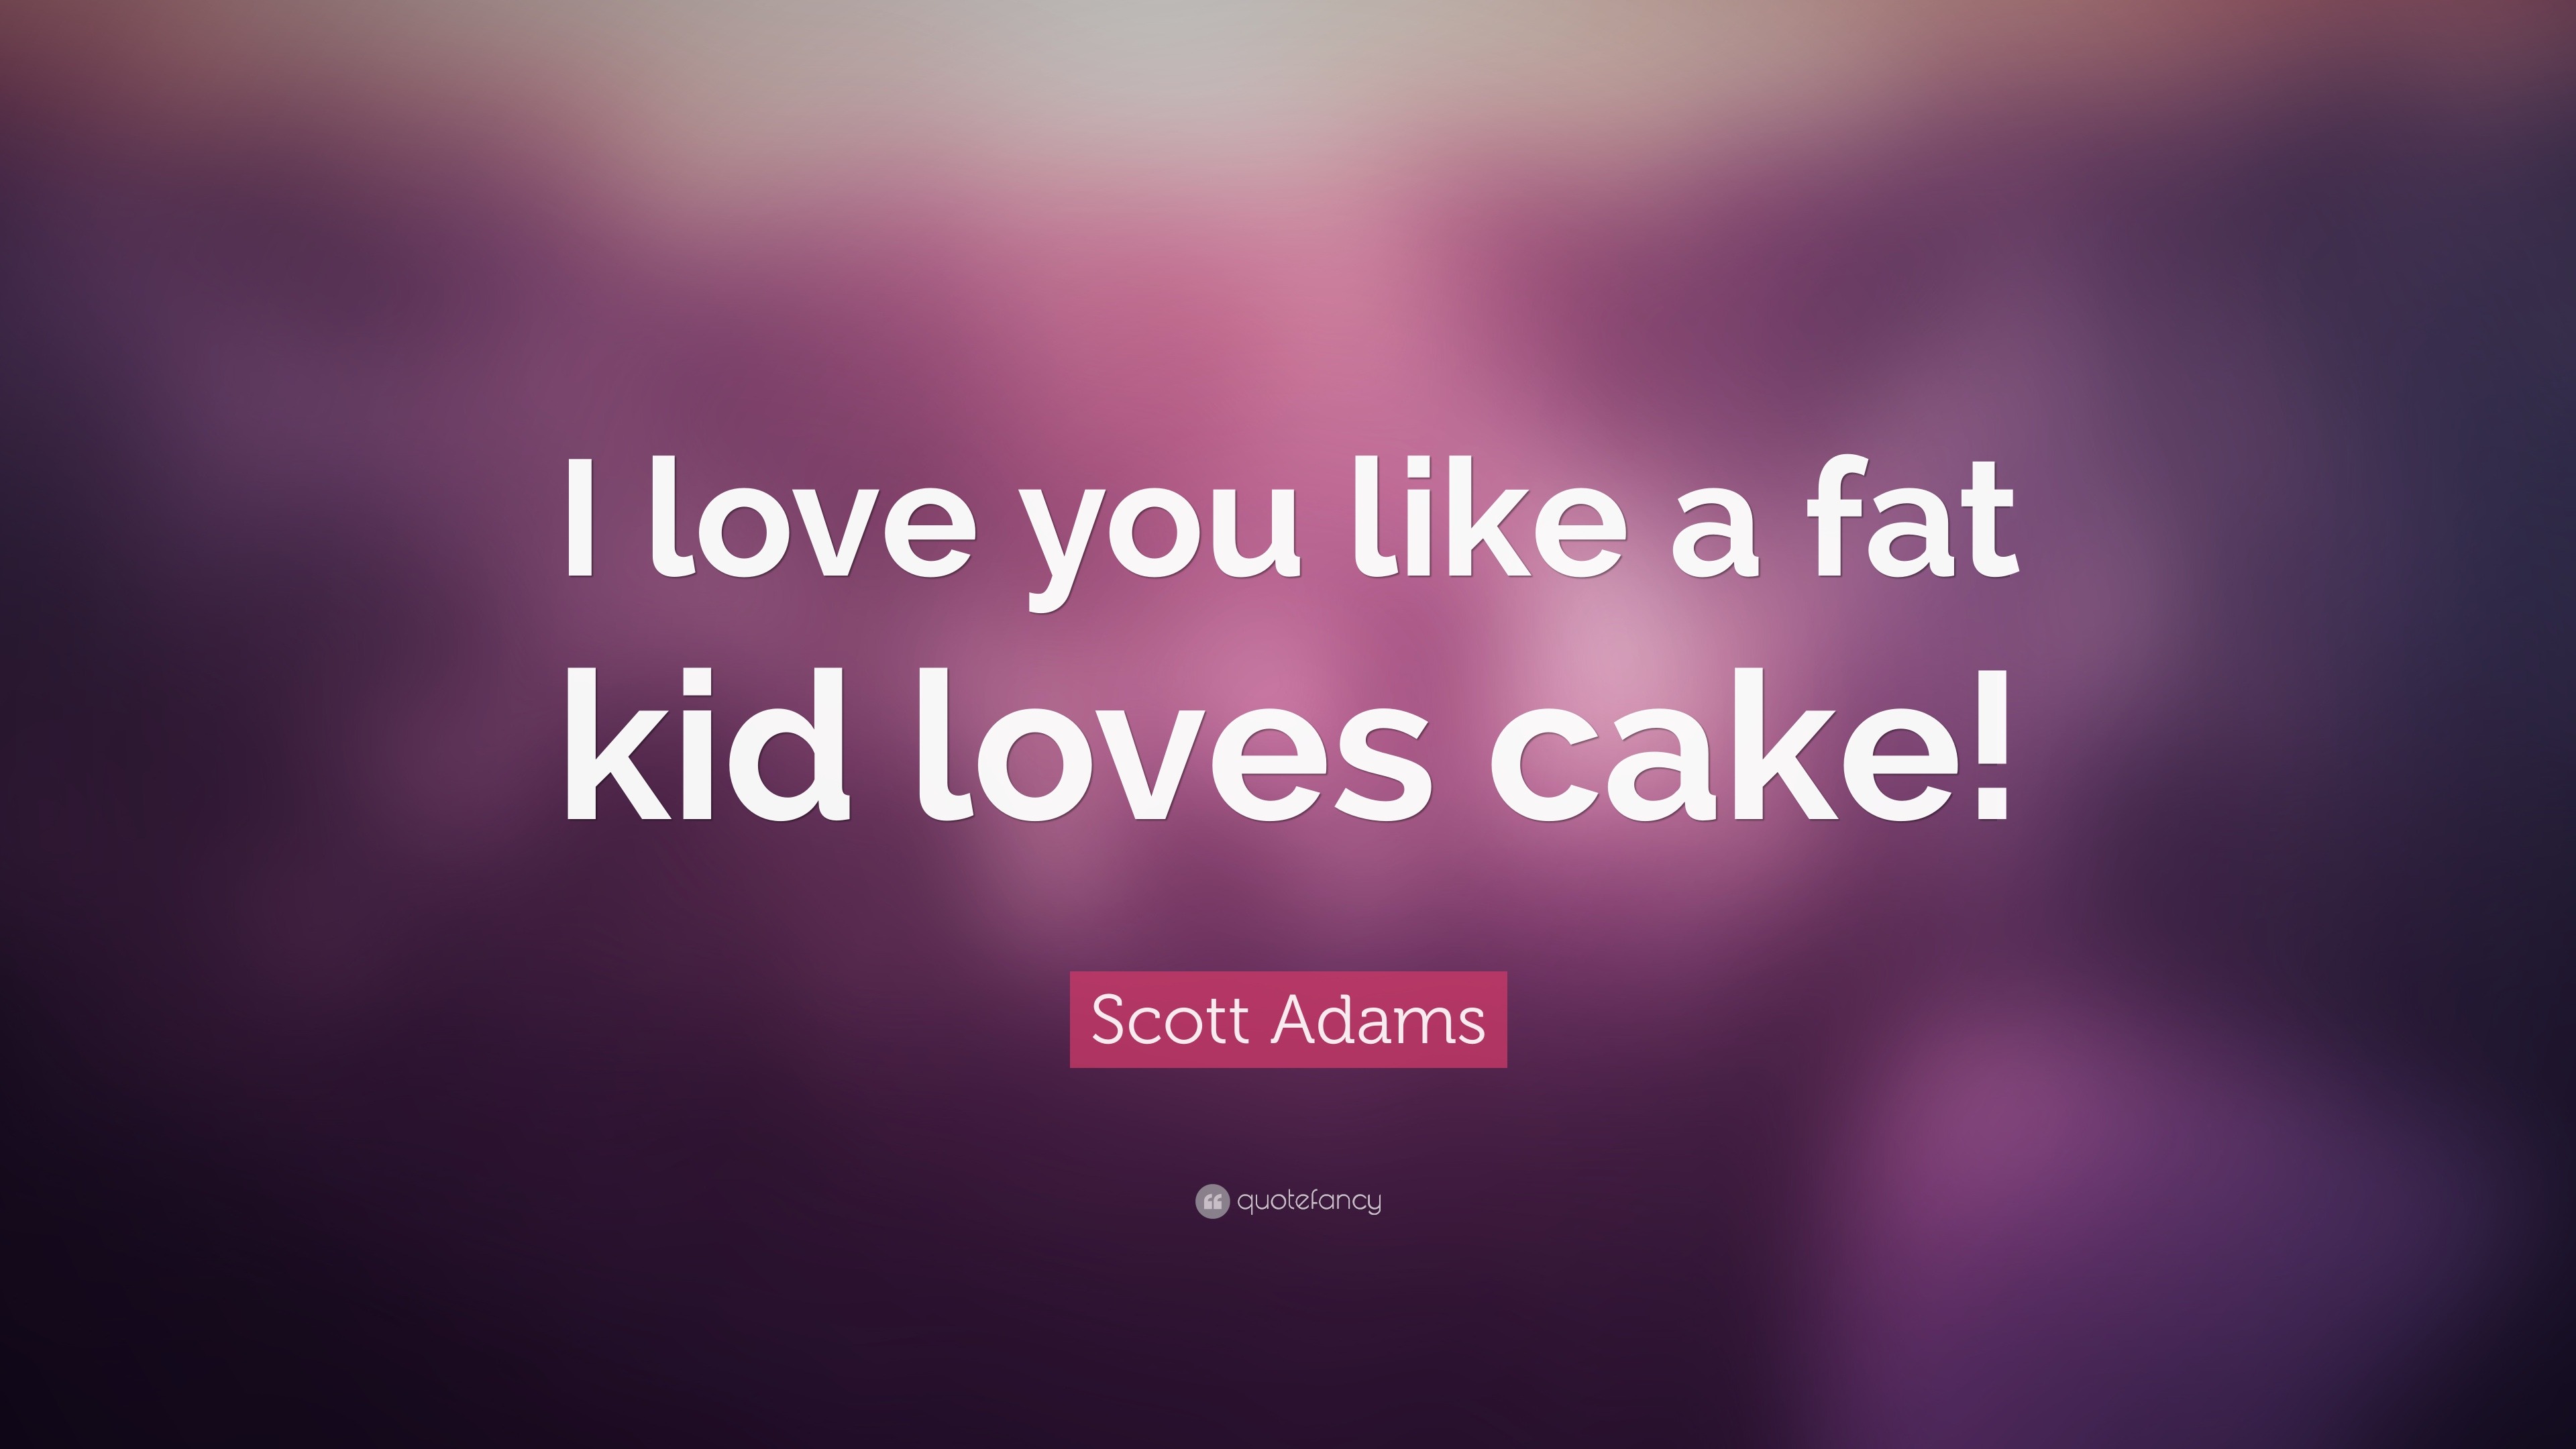 Scott Adams Quote “I love you like a fat kid loves cake ”